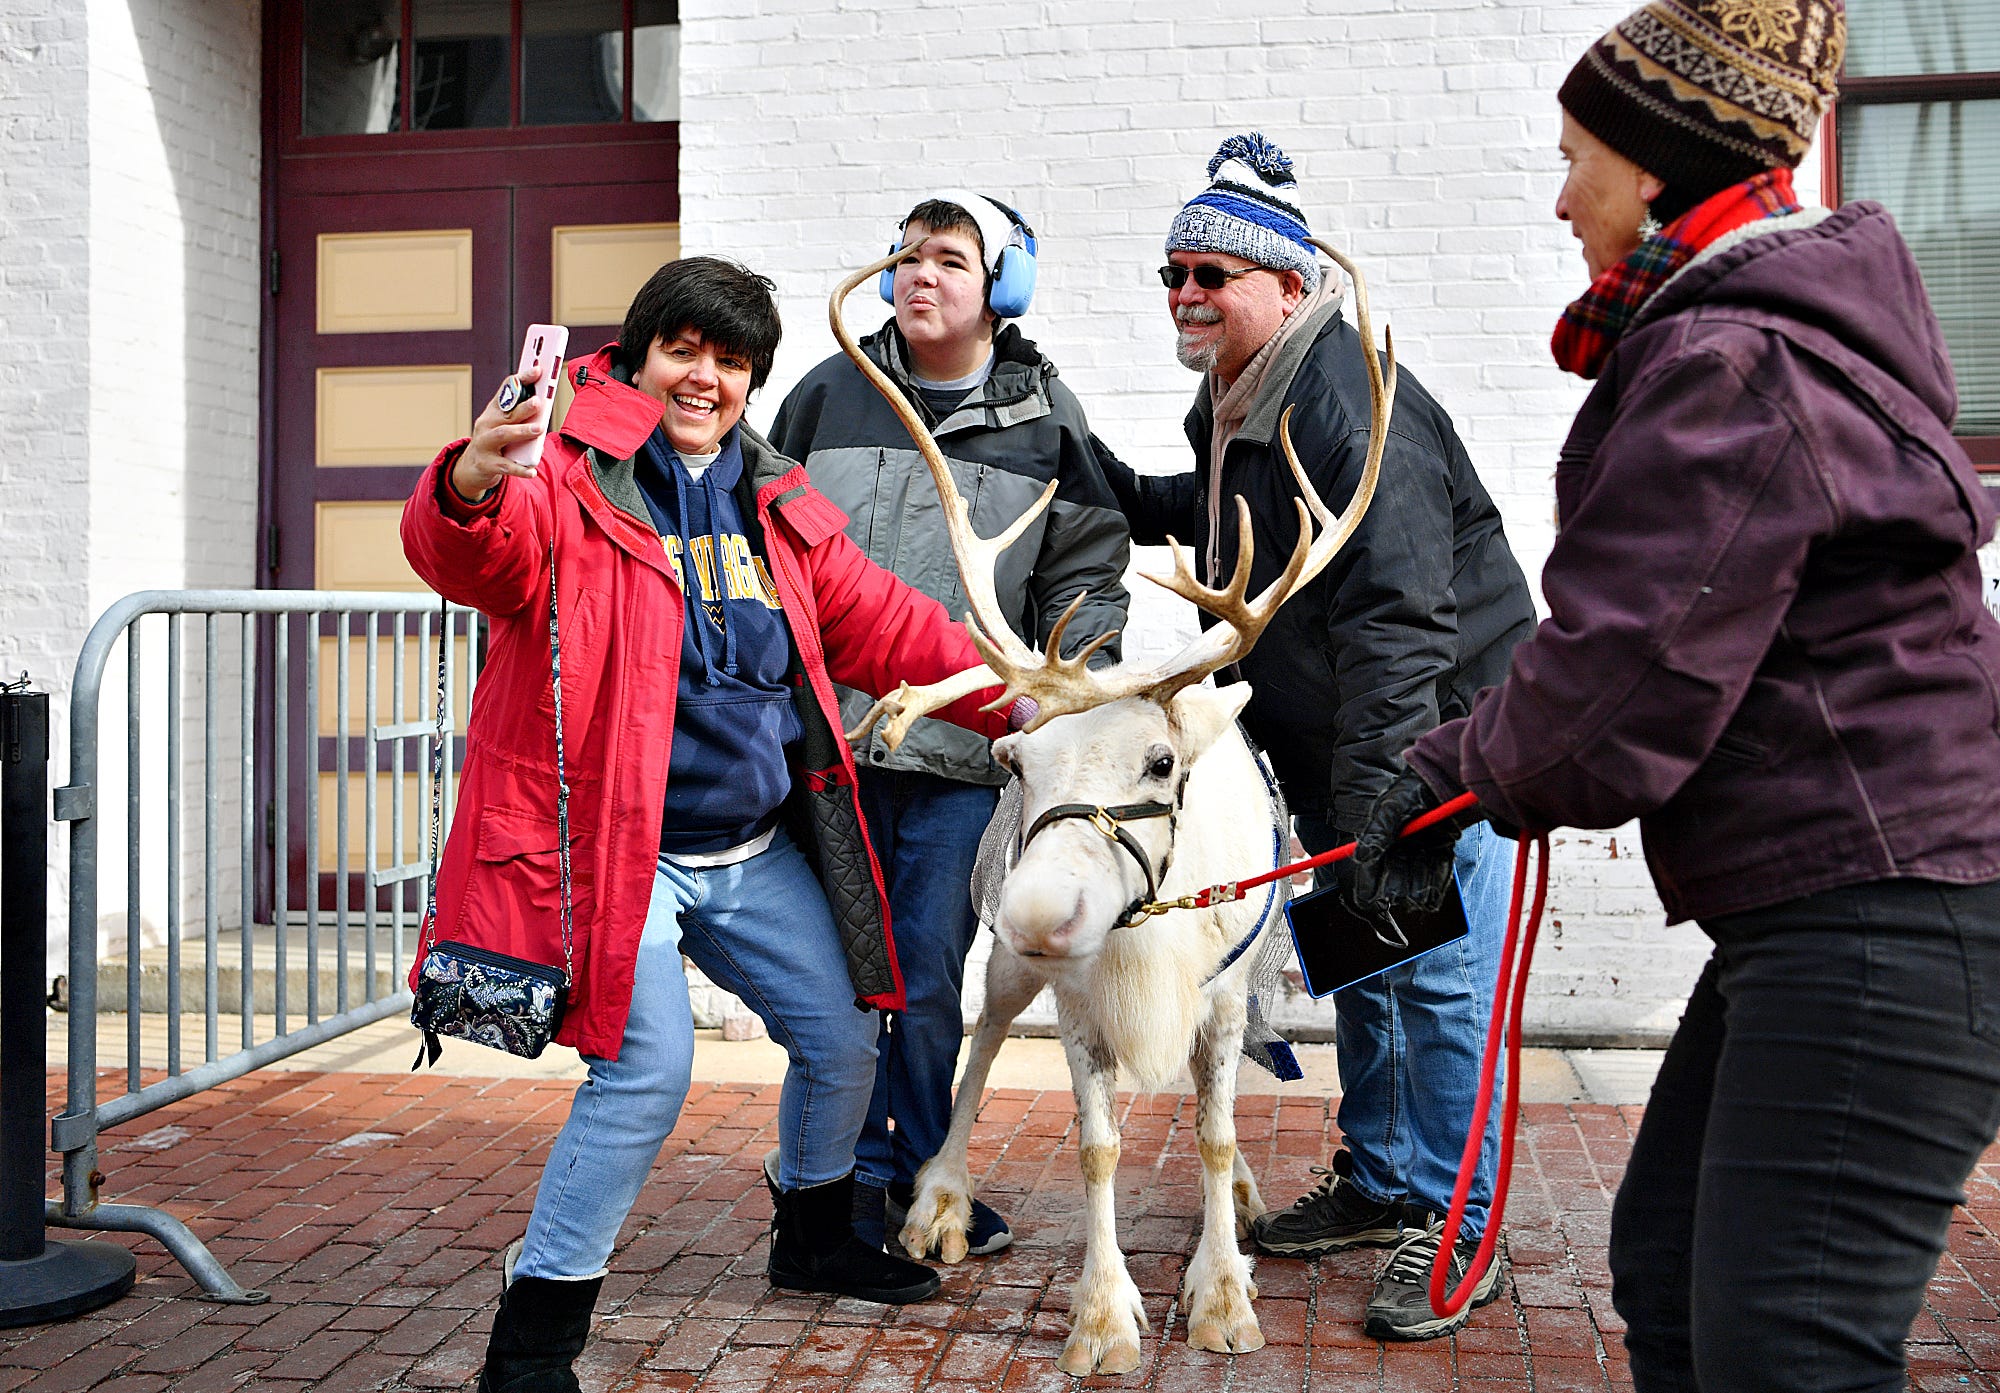 Zoann Parker, right, of TNZ Farm, secures Snow, an 8-year-old reindeer as she poses for a photo with, from left, Dianne Newman, Matthew Newman, 14, and Jeff Newman, all of West Manchester Township, during the 8th annual FestivICE event in downtown York City, Saturday, Jan. 15, 2022. "She's retired," said Parker of Snow. "This is all she does 'cuz she's a diva." Dawn J. Sagert photo